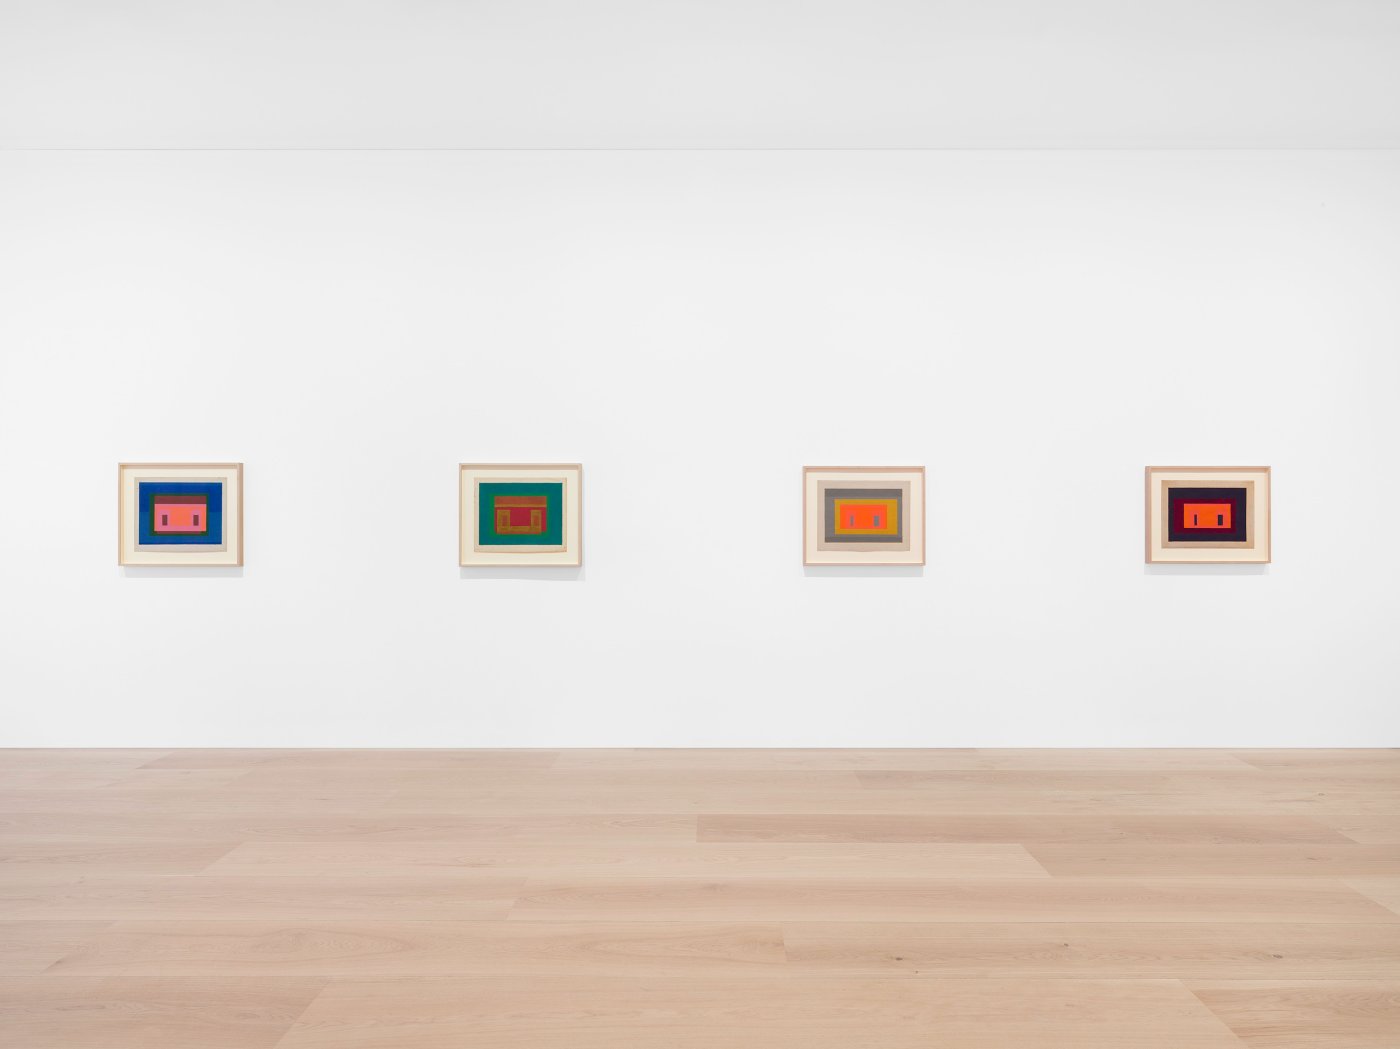 Installation image for Josef Albers: Paintings Titled Variants, at David Zwirner